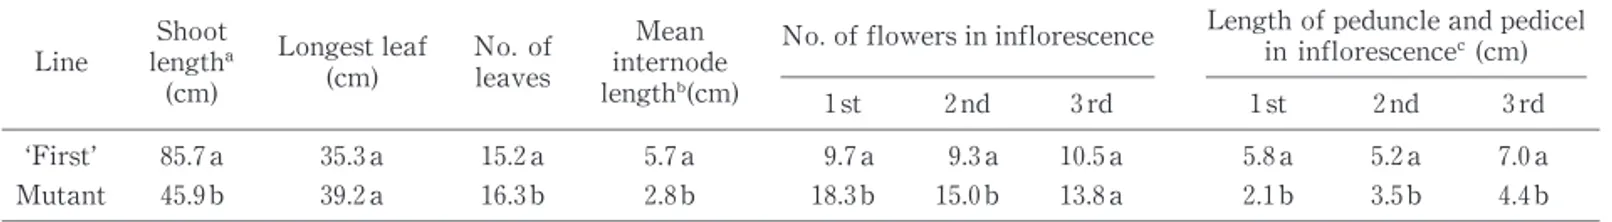 Table 1   Morphological characters in M progenies of a tomato mutant with short internodes   Line   Shootlength  (cm) Longest leaf(cm) No